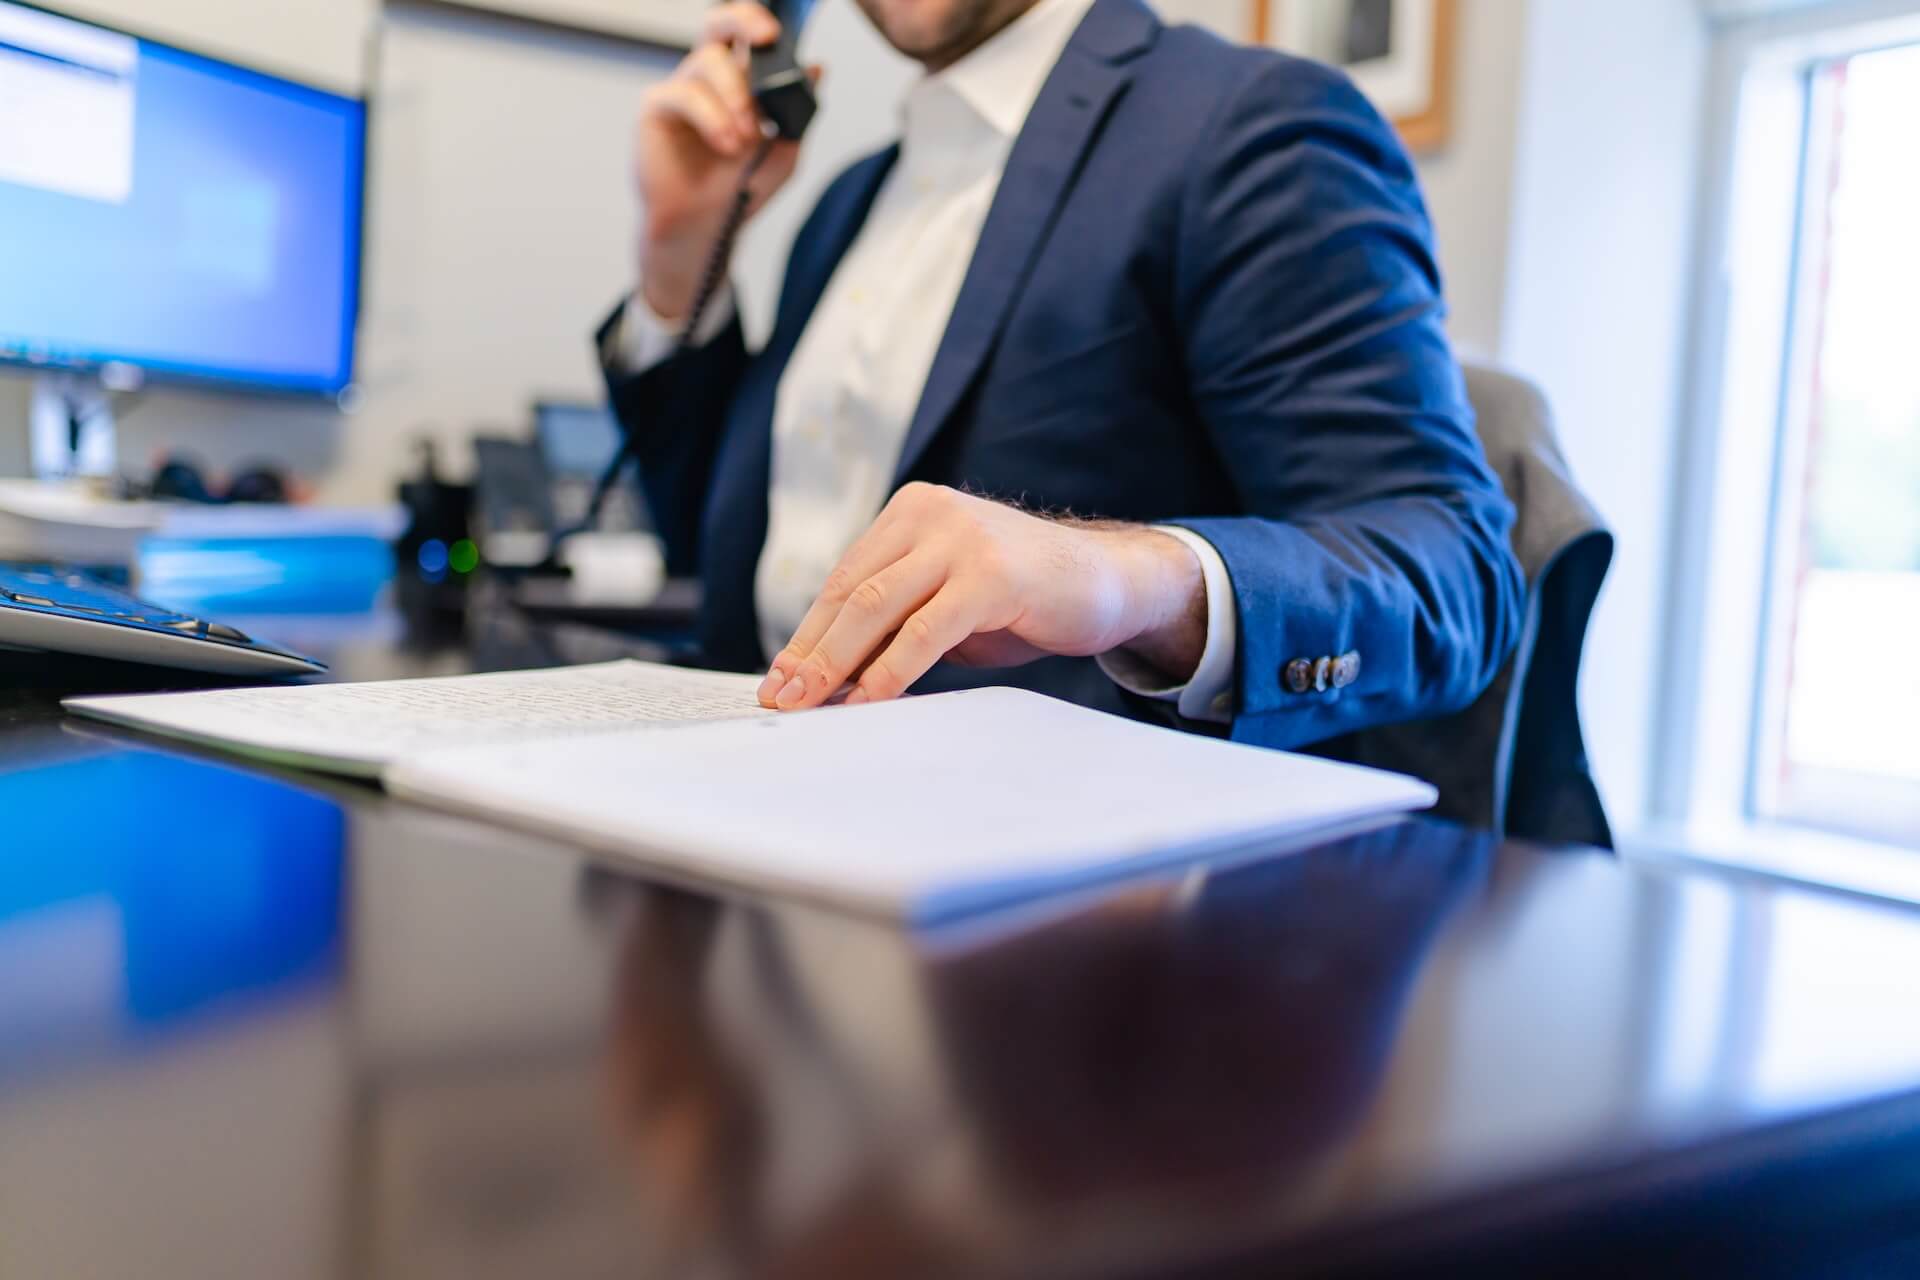 Business man on a phone in an office